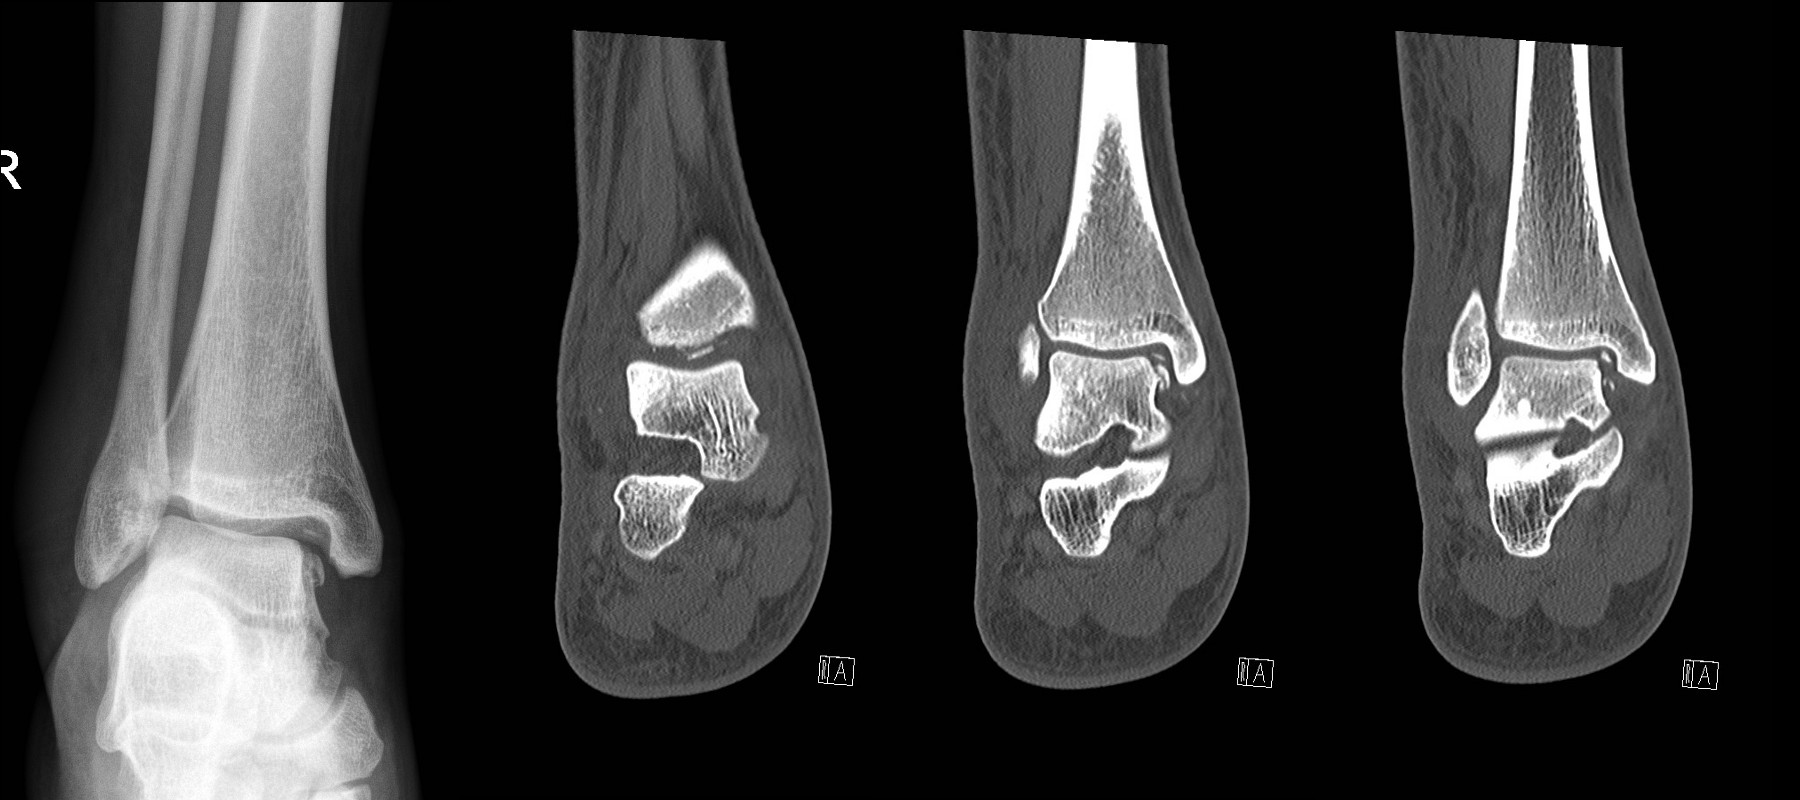 Talar dome fracture. X-ray (left) looks simple but CT shows multiple intra-articular bony fragments